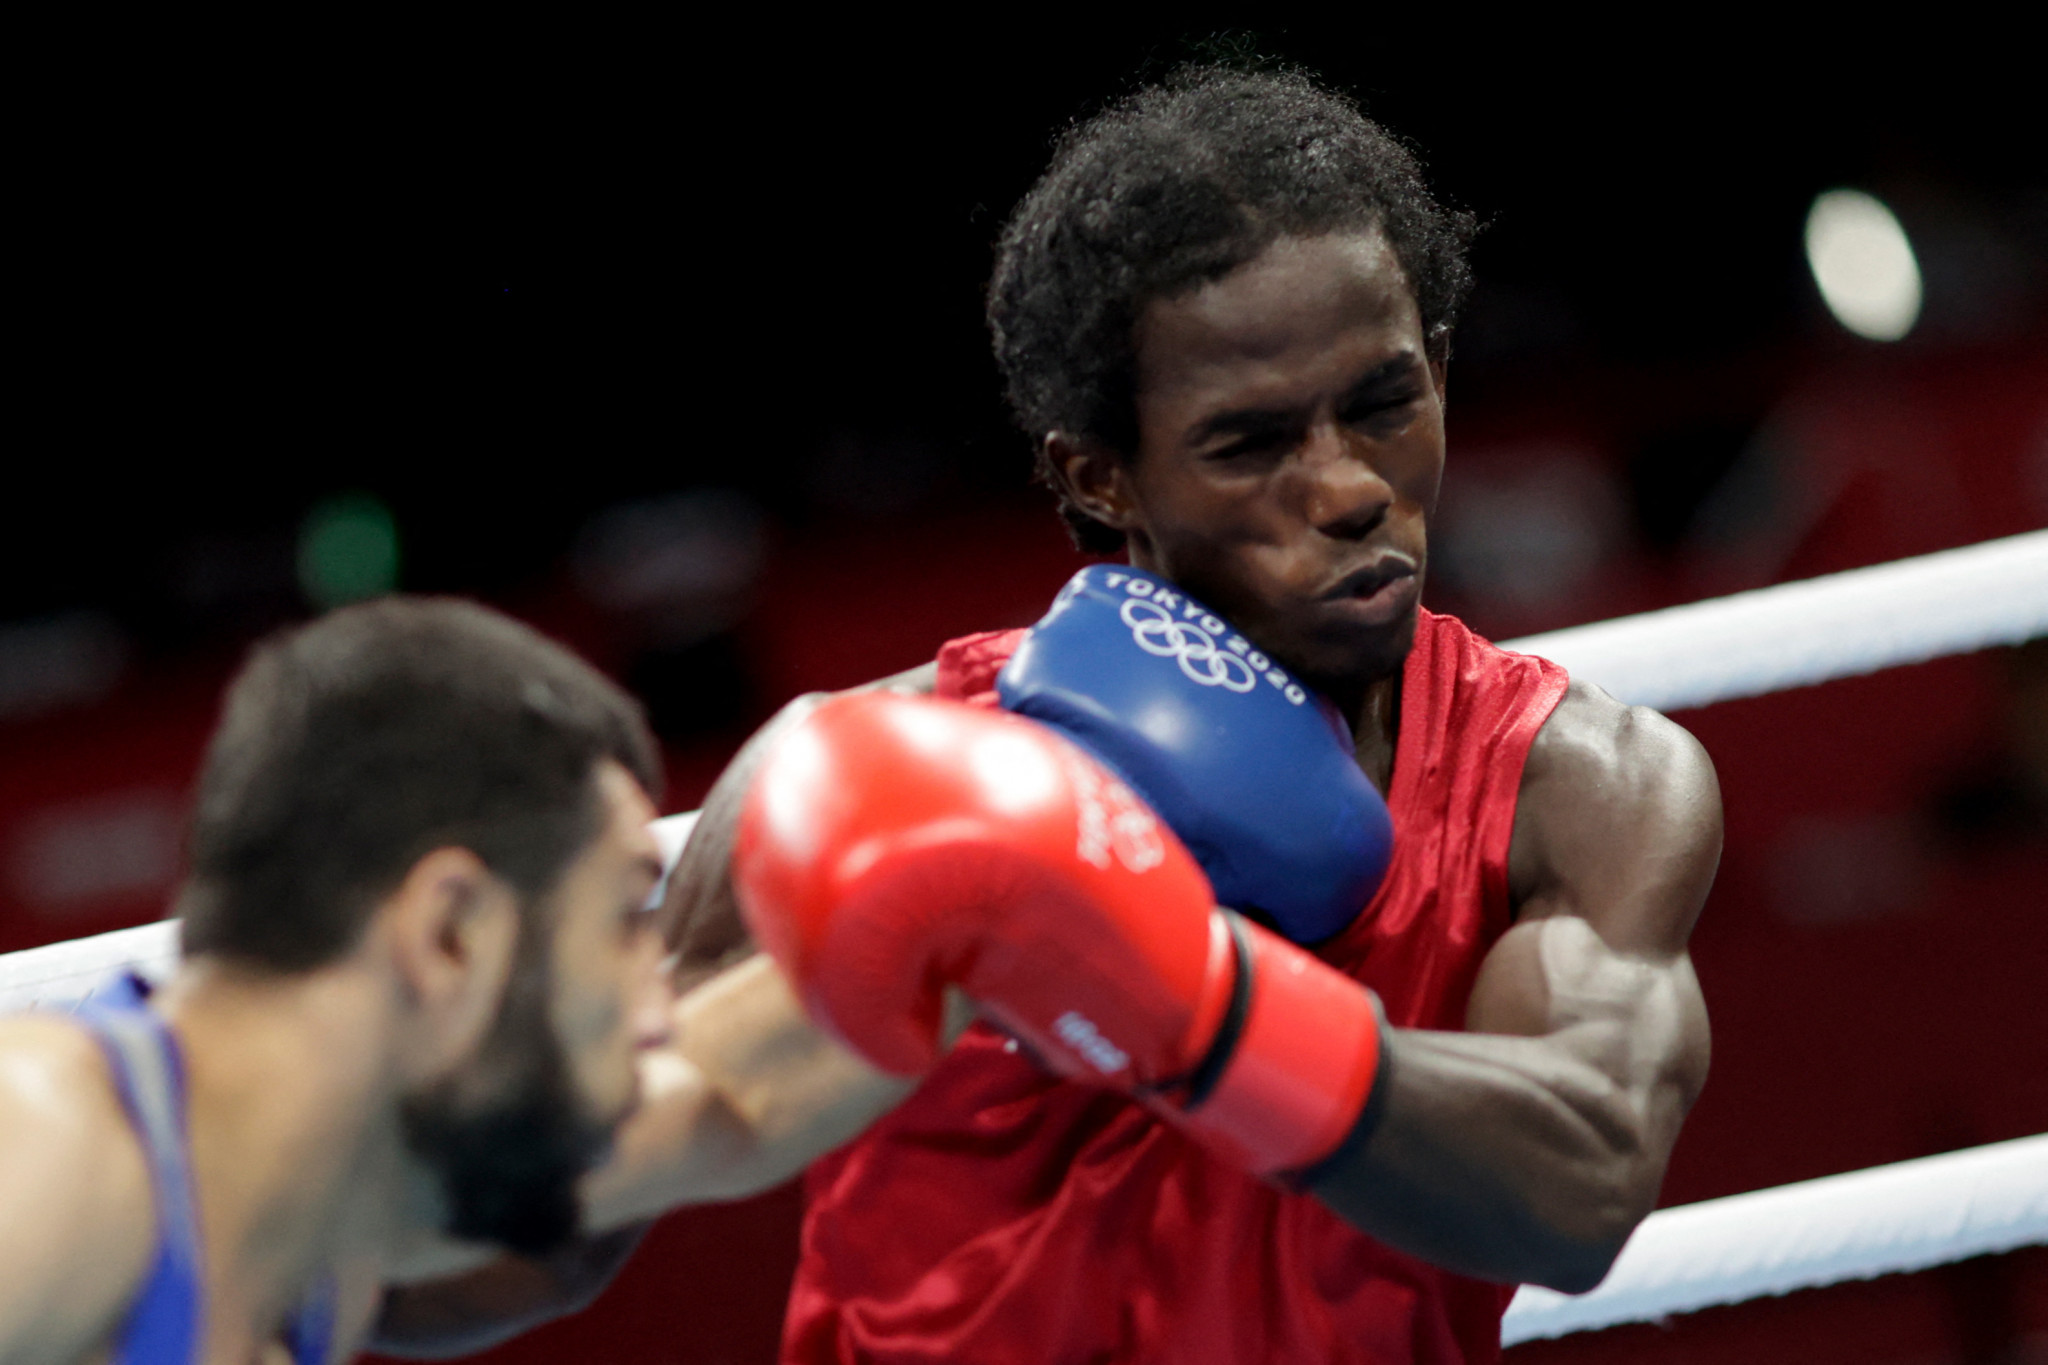 Cape Verde's Daniel Varela de Pina competed in the men's flyweight division at Tokyo 2020 ©Getty Images